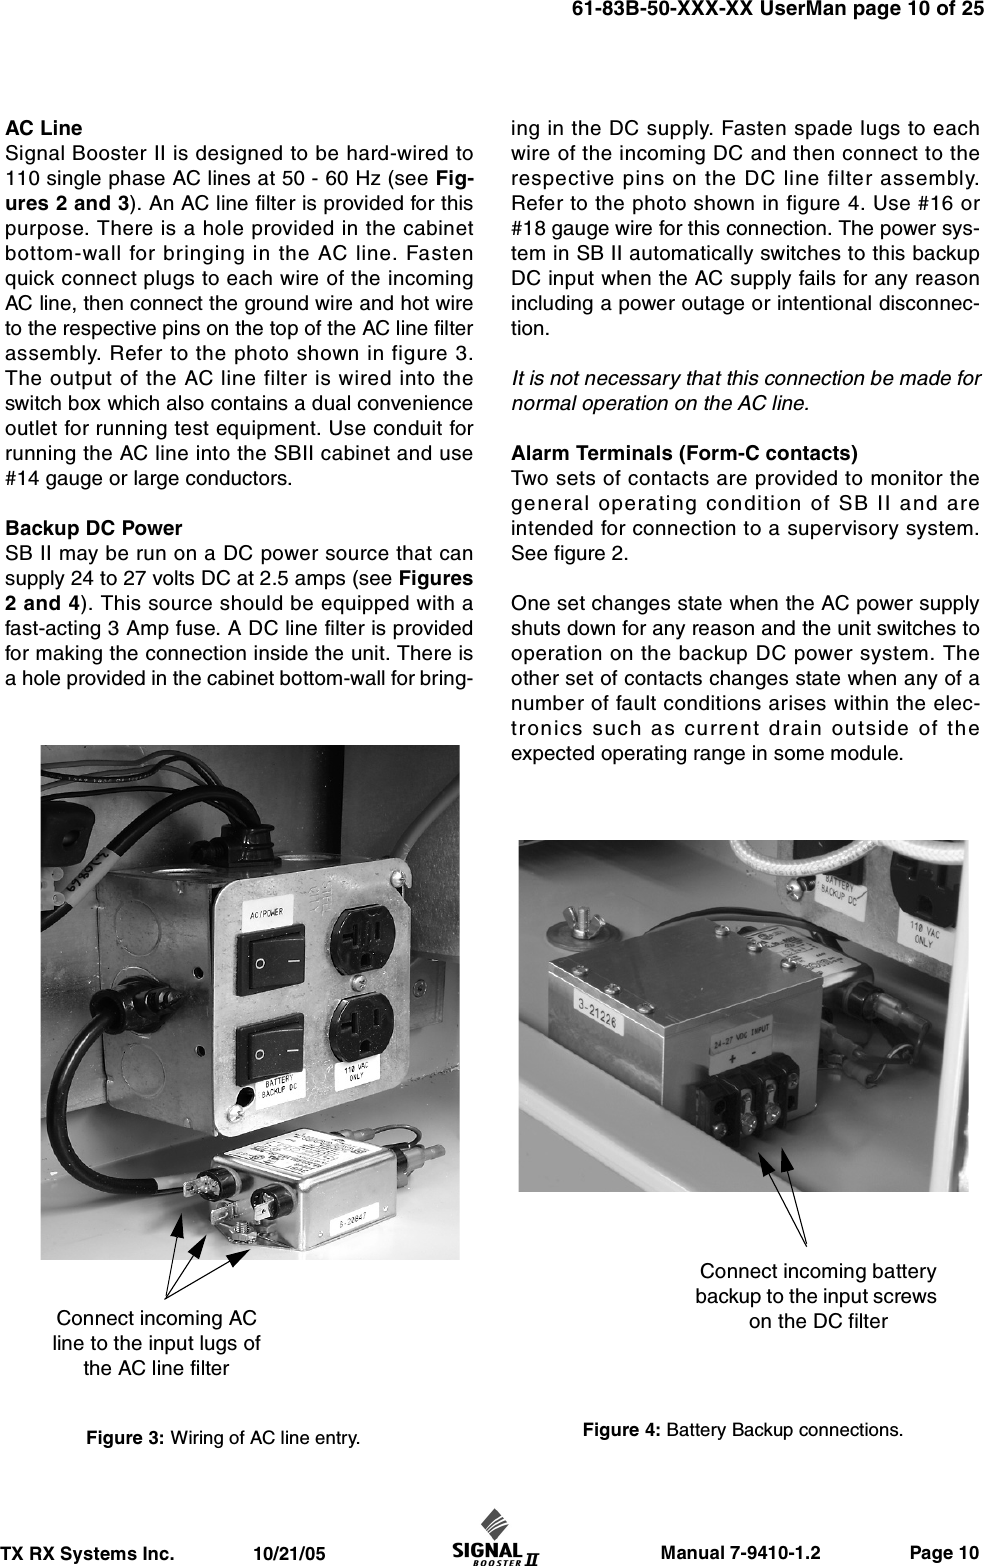                     Manual 7-9410-1.2                 Page 10TX RX Systems Inc.               10/21/0561-83B-50-XXX-XX UserMan page 10 of 25AC LineSignal Booster II is designed to be hard-wired to110 single phase AC lines at 50 - 60 Hz (see Fig-ures 2 and 3). An AC line filter is provided for thispurpose. There is a hole provided in the cabinetbottom-wall for bringing in the AC line. Fastenquick connect plugs to each wire of the incomingAC line, then connect the ground wire and hot wireto the respective pins on the top of the AC line filterassembly. Refer to the photo shown in figure 3.The output of the AC line filter is wired into theswitch box which also contains a dual convenienceoutlet for running test equipment. Use conduit forrunning the AC line into the SBII cabinet and use#14 gauge or large conductors.Backup DC PowerSB II may be run on a DC power source that cansupply 24 to 27 volts DC at 2.5 amps (see Figures2 and 4). This source should be equipped with afast-acting 3 Amp fuse. A DC line filter is providedfor making the connection inside the unit. There isa hole provided in the cabinet bottom-wall for bring-ing in the DC supply. Fasten spade lugs to eachwire of the incoming DC and then connect to therespective pins on the DC line filter assembly.Refer to the photo shown in figure 4. Use #16 or#18 gauge wire for this connection. The power sys-tem in SB II automatically switches to this backupDC input when the AC supply fails for any reasonincluding a power outage or intentional disconnec-tion.It is not necessary that this connection be made fornormal operation on the AC line.Alarm Terminals (Form-C contacts)Two sets of contacts are provided to monitor thegeneral operating condition of SB II and areintended for connection to a supervisory system.See figure 2. One set changes state when the AC power supplyshuts down for any reason and the unit switches tooperation on the backup DC power system. Theother set of contacts changes state when any of anumber of fault conditions arises within the elec-tronics such as current drain outside of theexpected operating range in some module.Figure 3: Wiring of AC line entry.Connect incoming AC line to the input lugs of the AC line filterConnect incoming battery backup to the input screws on the DC filter Figure 4: Battery Backup connections.